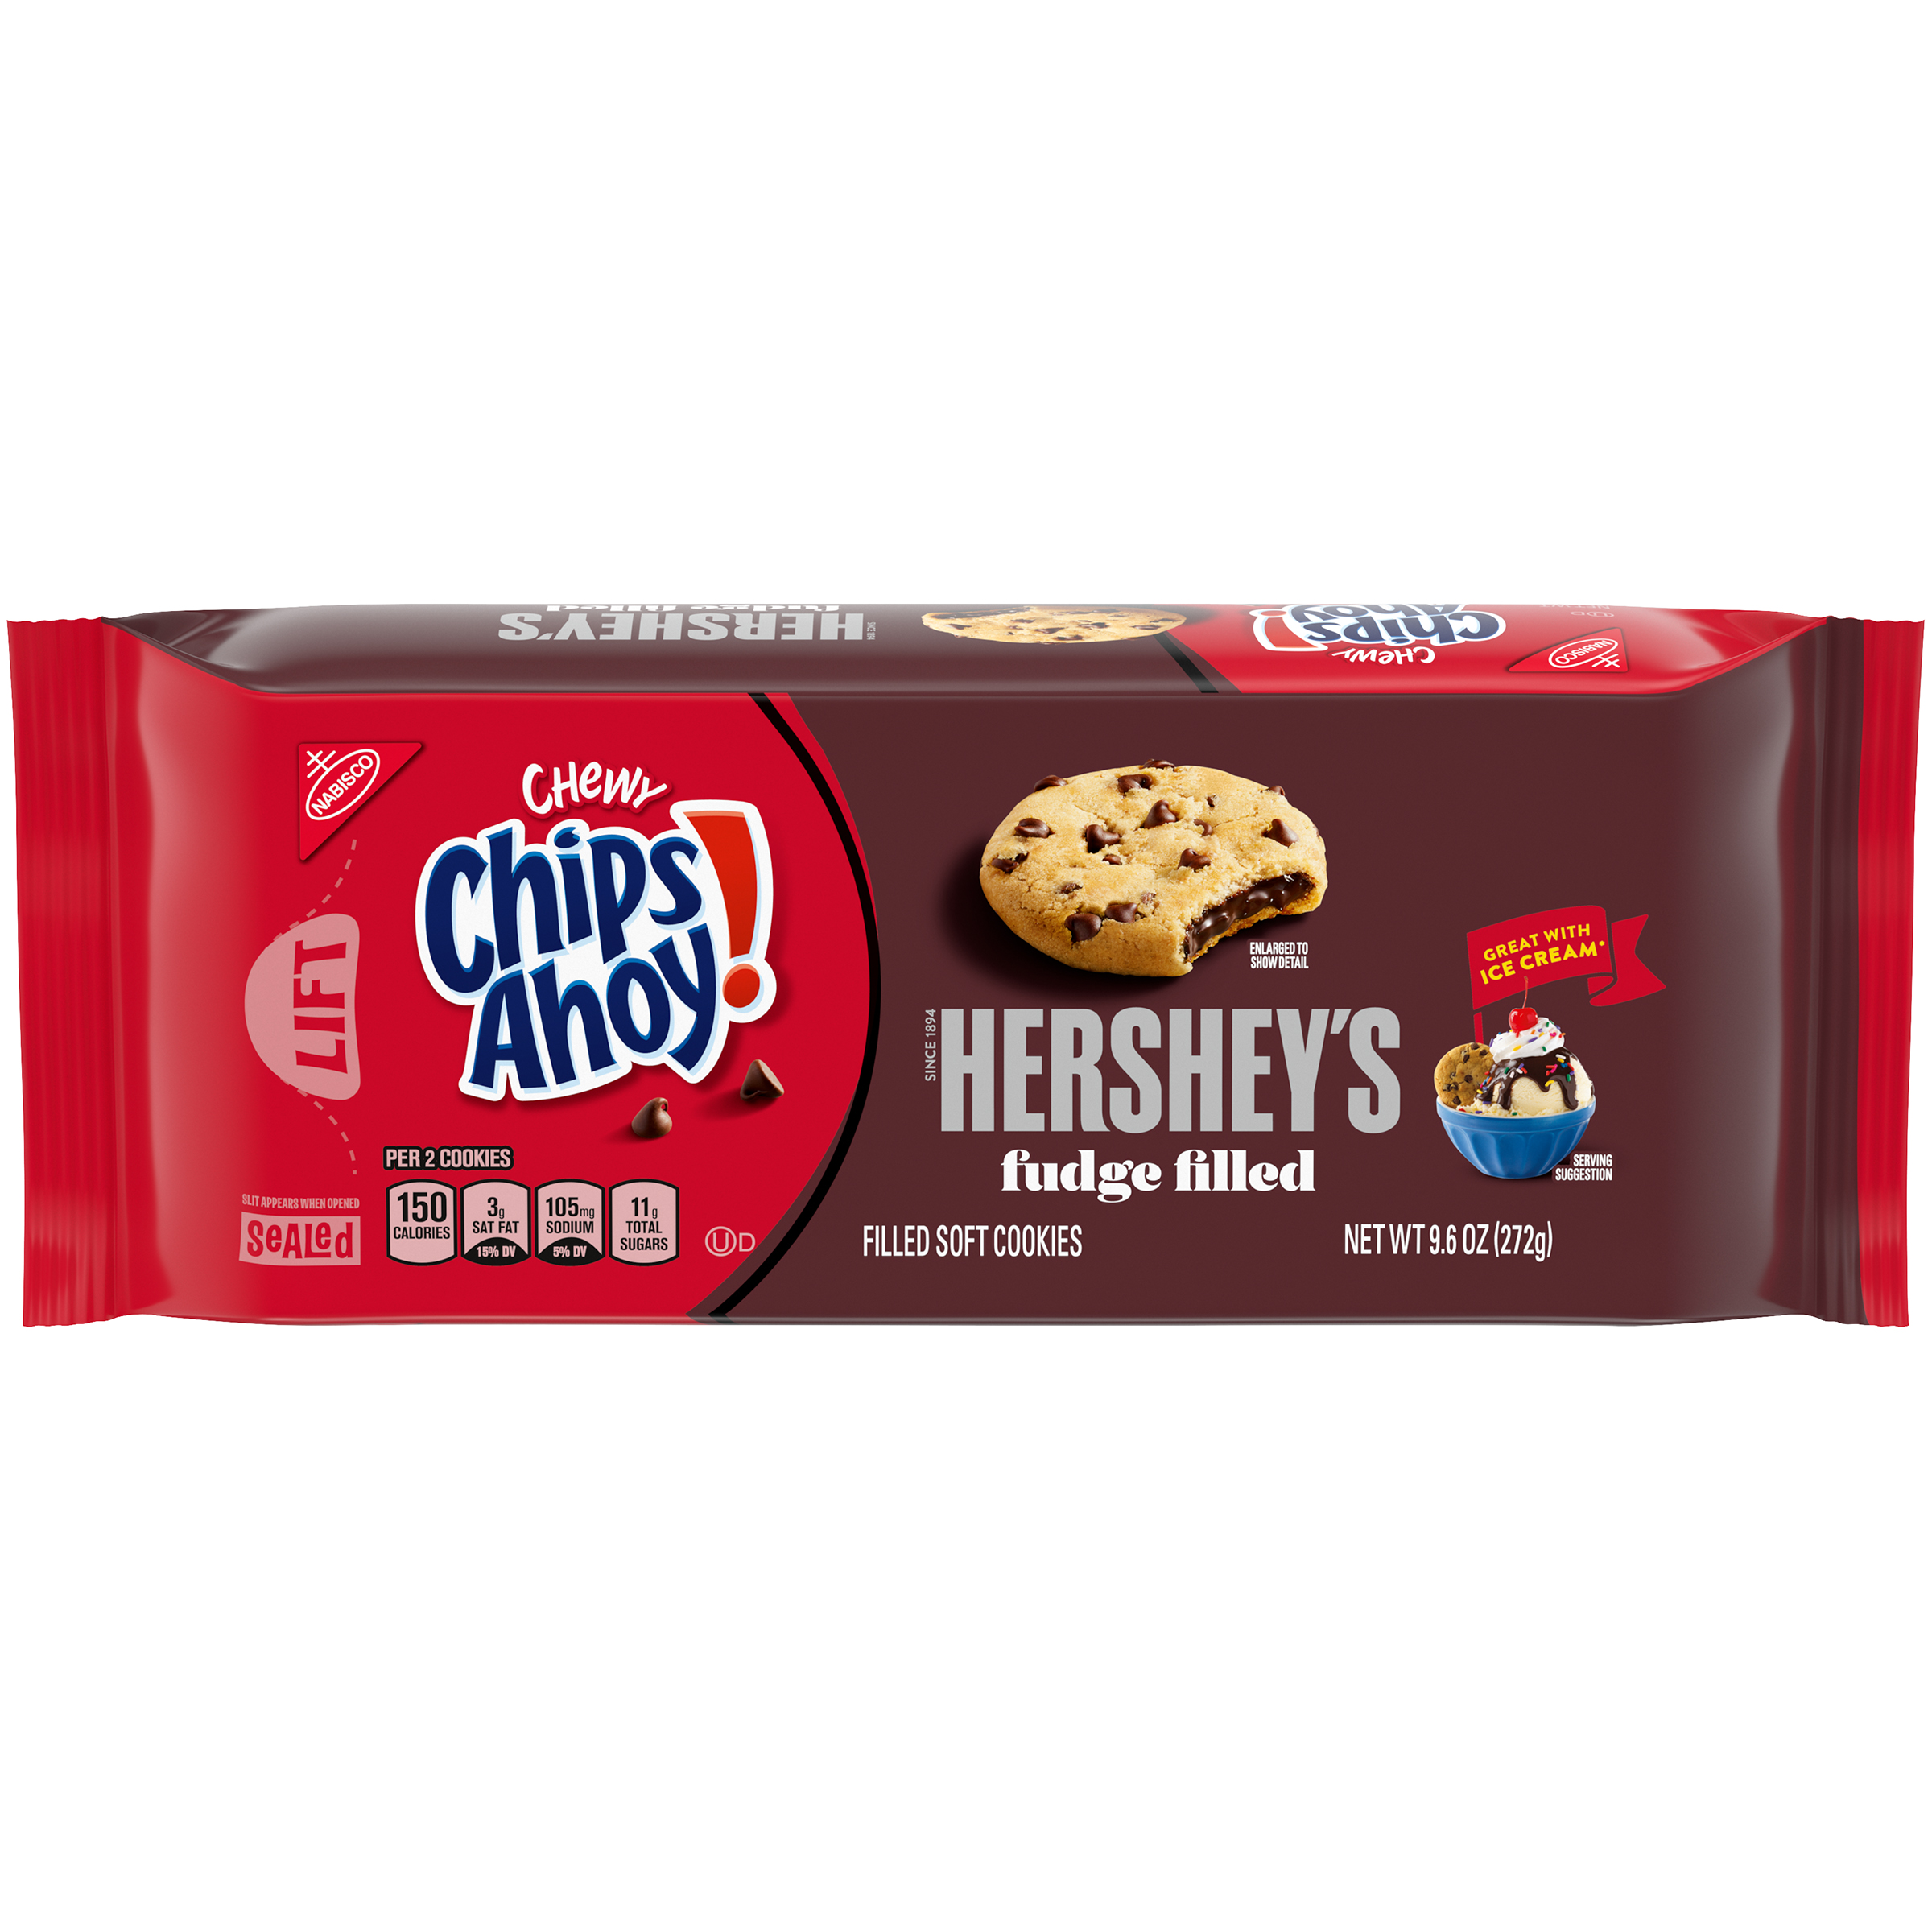 CHIPS AHOY! Chewy Cookies 0.6 LB